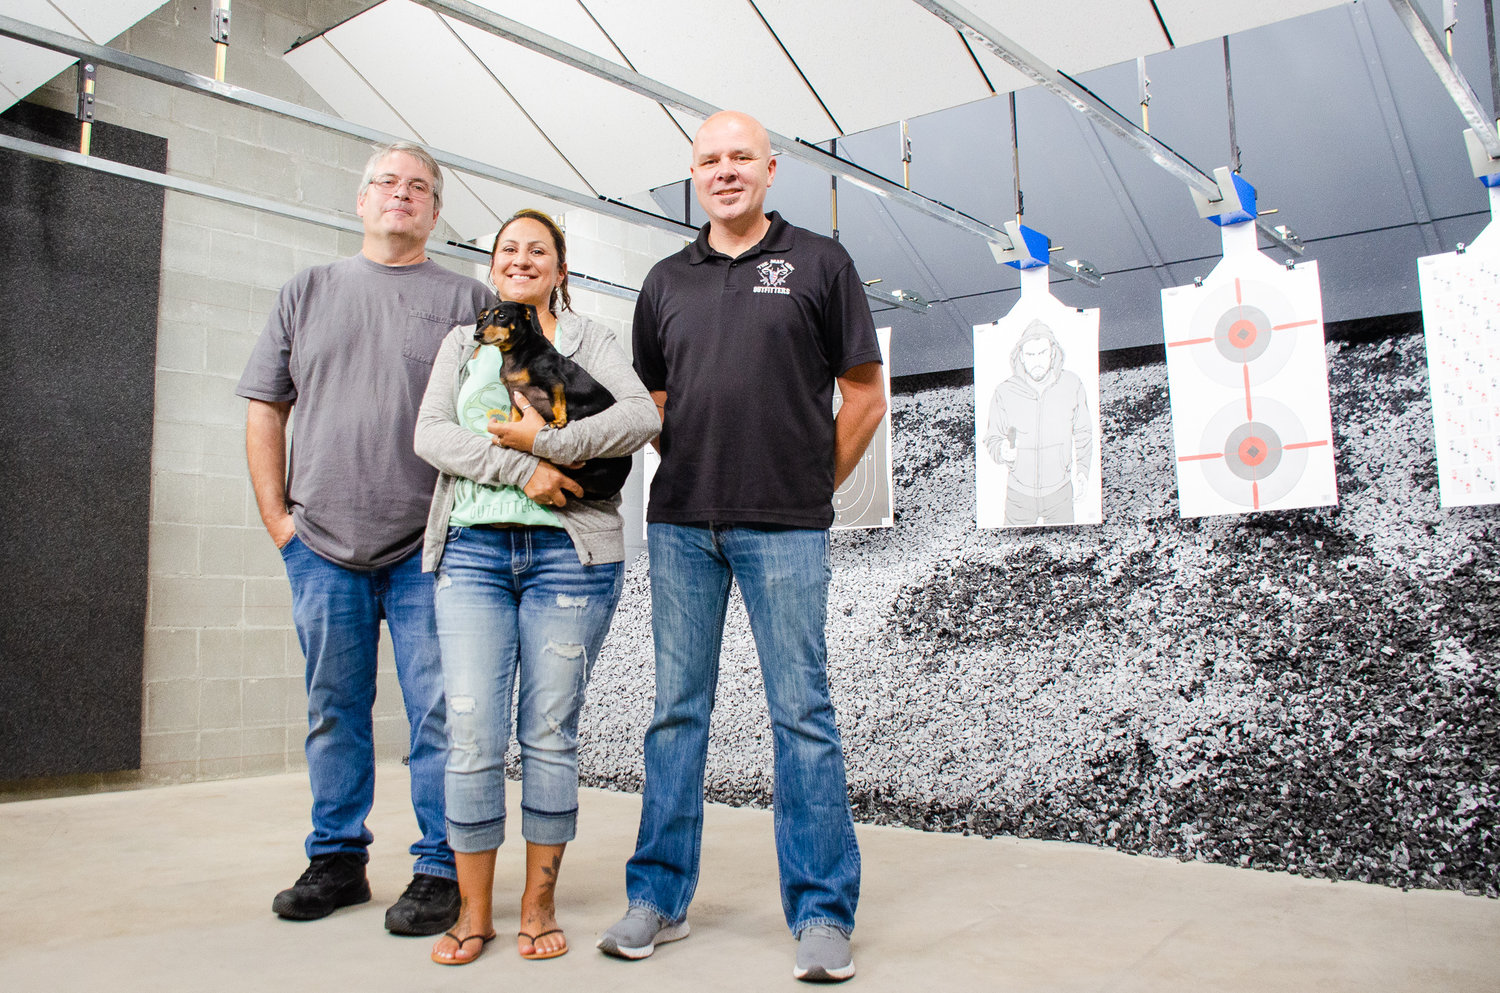 The Man Cave Outfitters co-owners, from left, Michael Irby and Shoni and Hobe Pannkuk pose for a photo Monday, July 19, inside the new indoor firing range at their Centralia business.